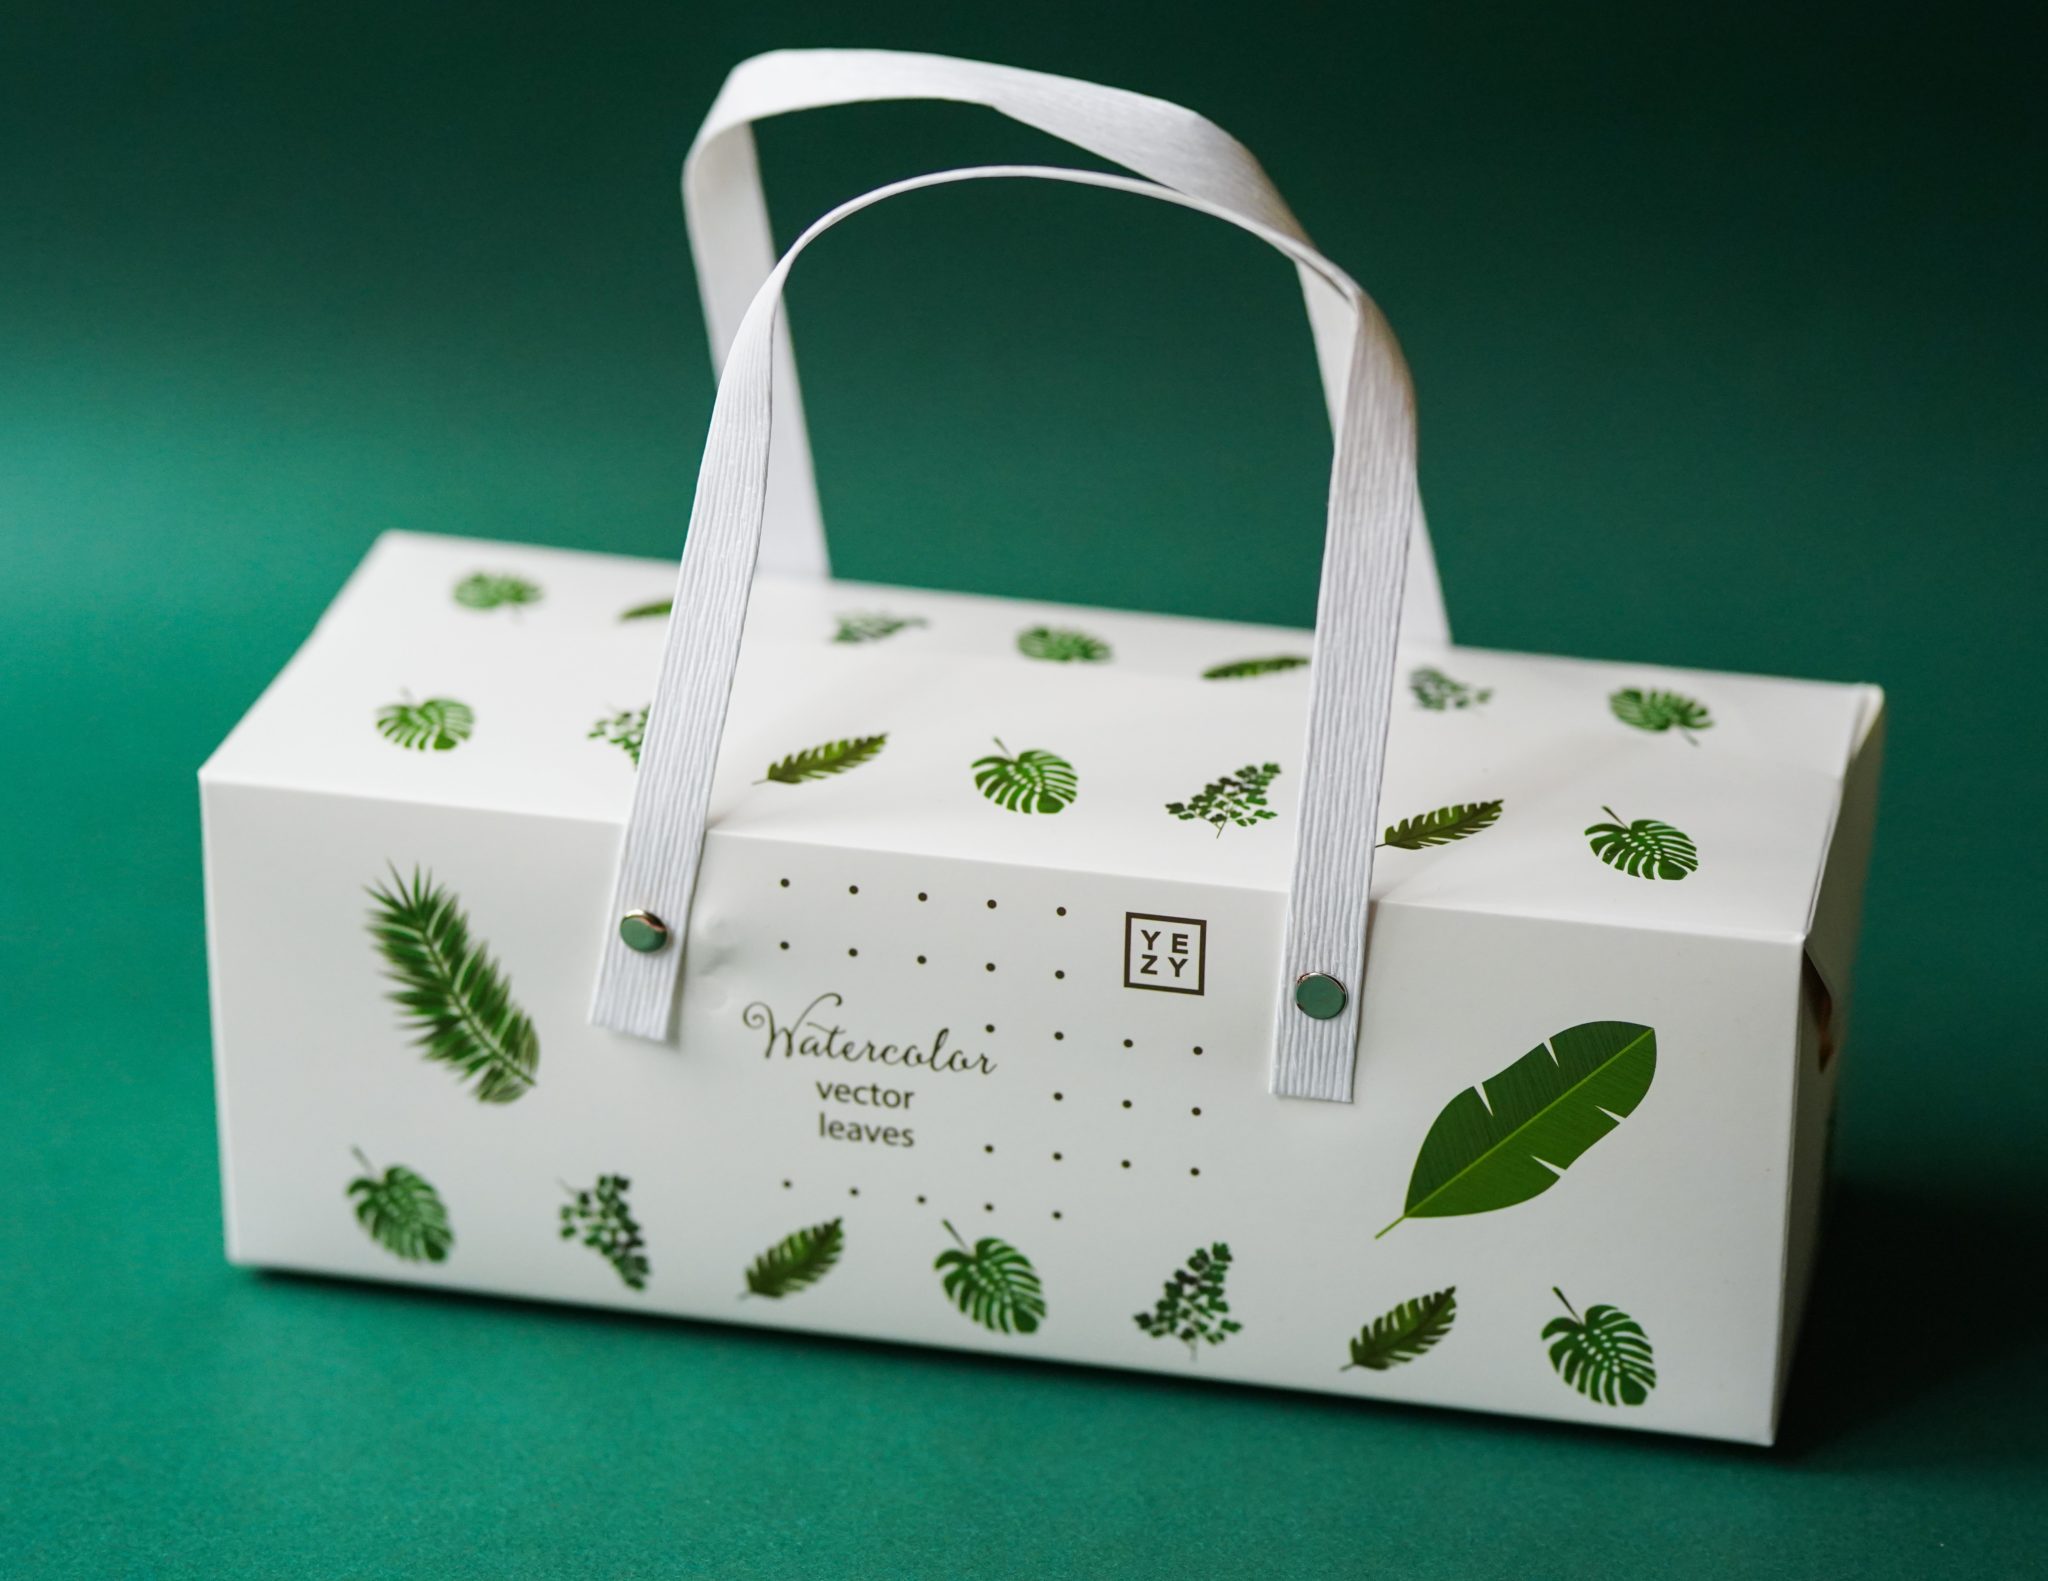 Custom packaging can truly boost your sales revenue.